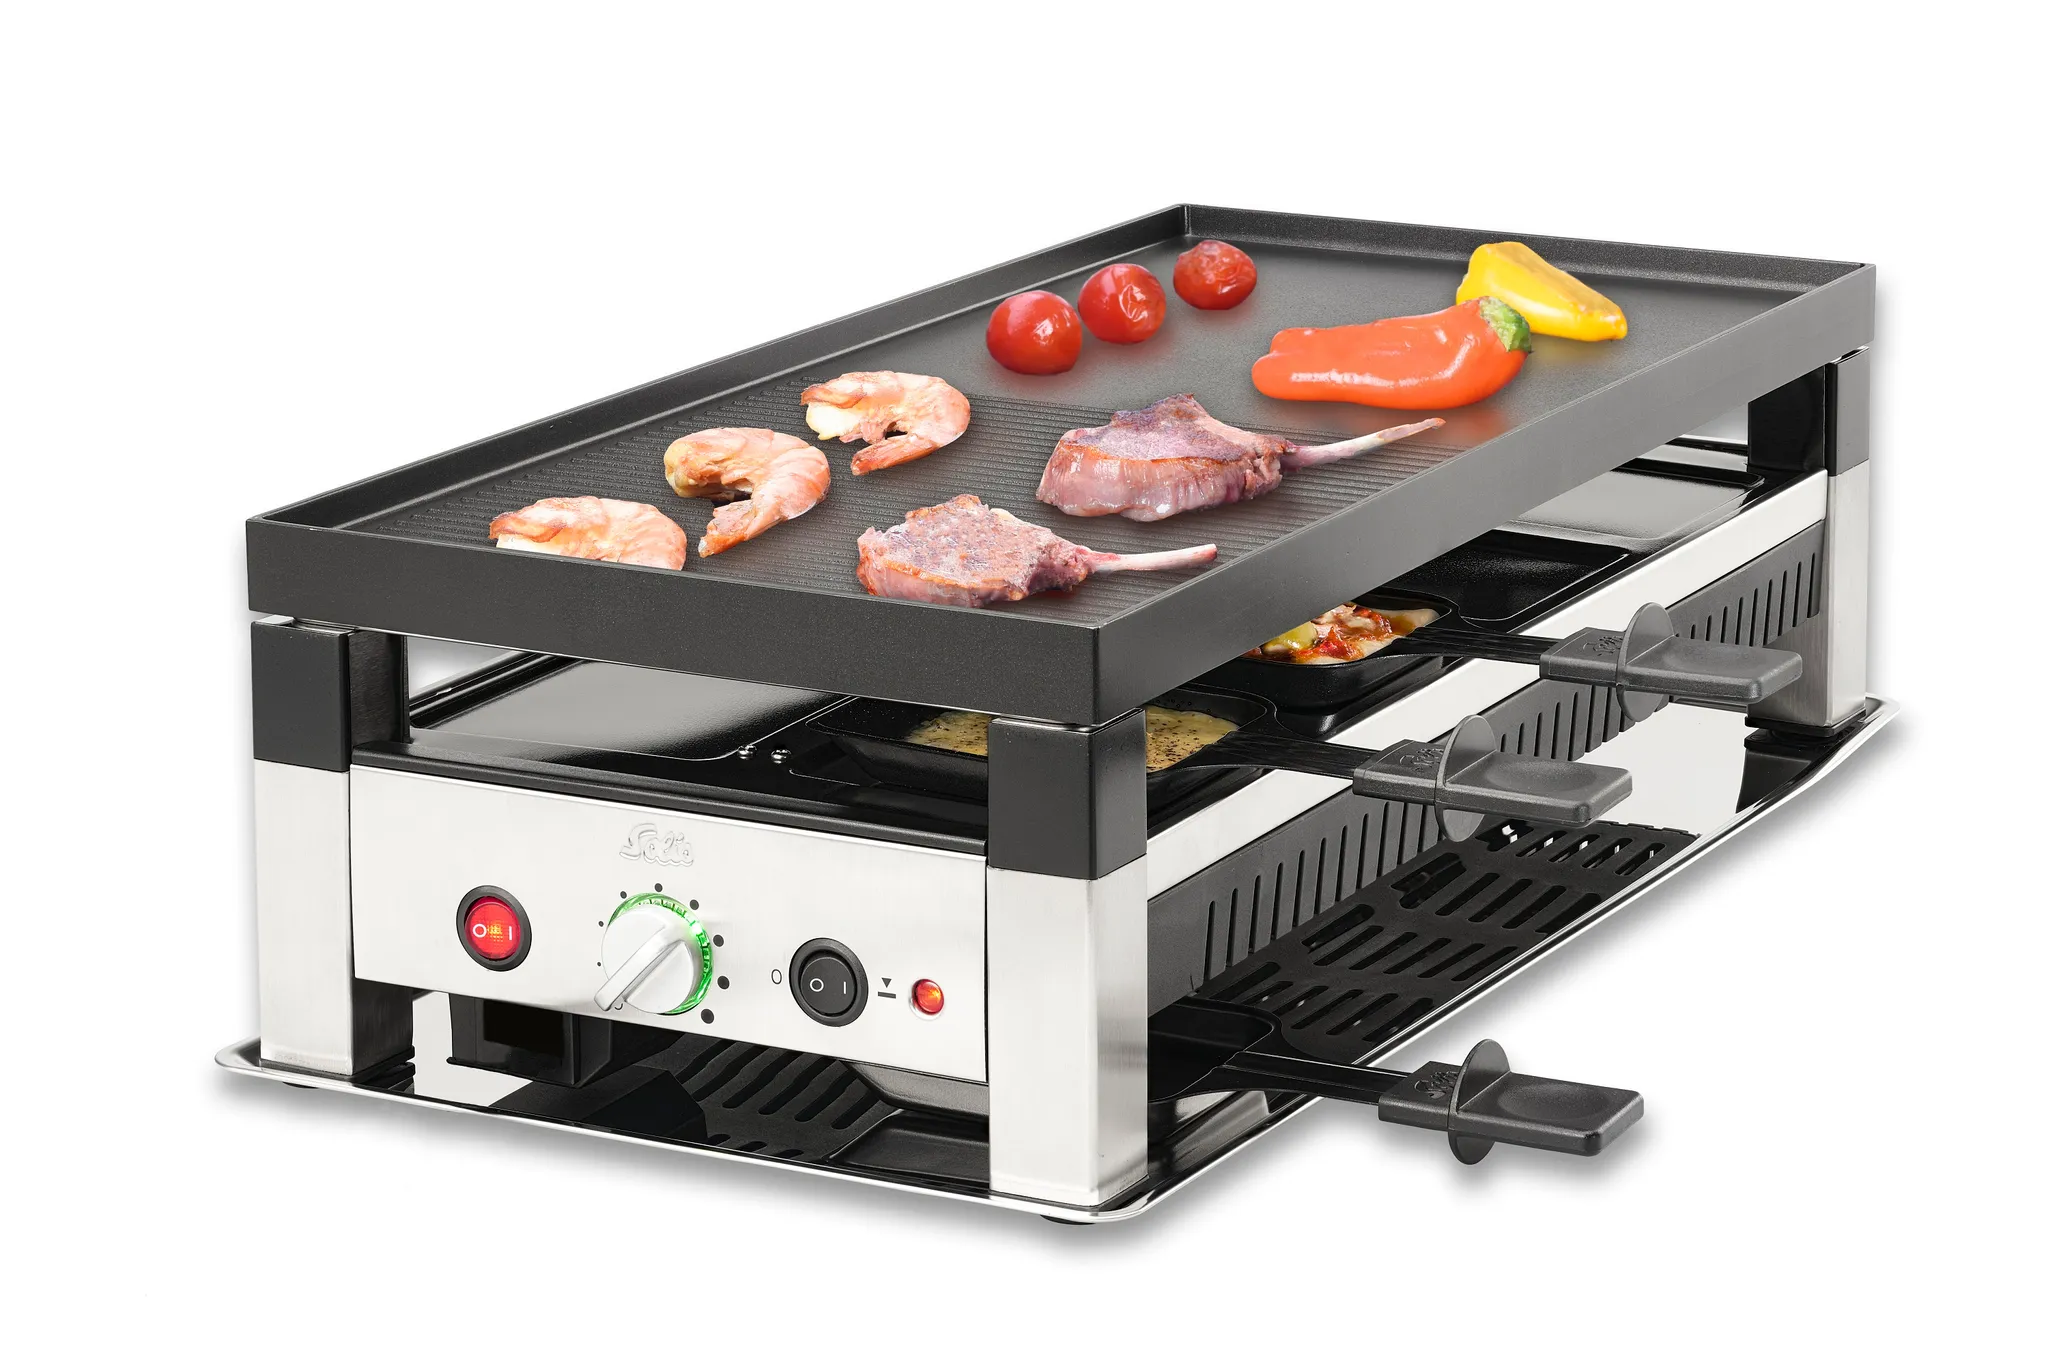 Solis 5 in 1 Table Grill 791 Raclette Grill